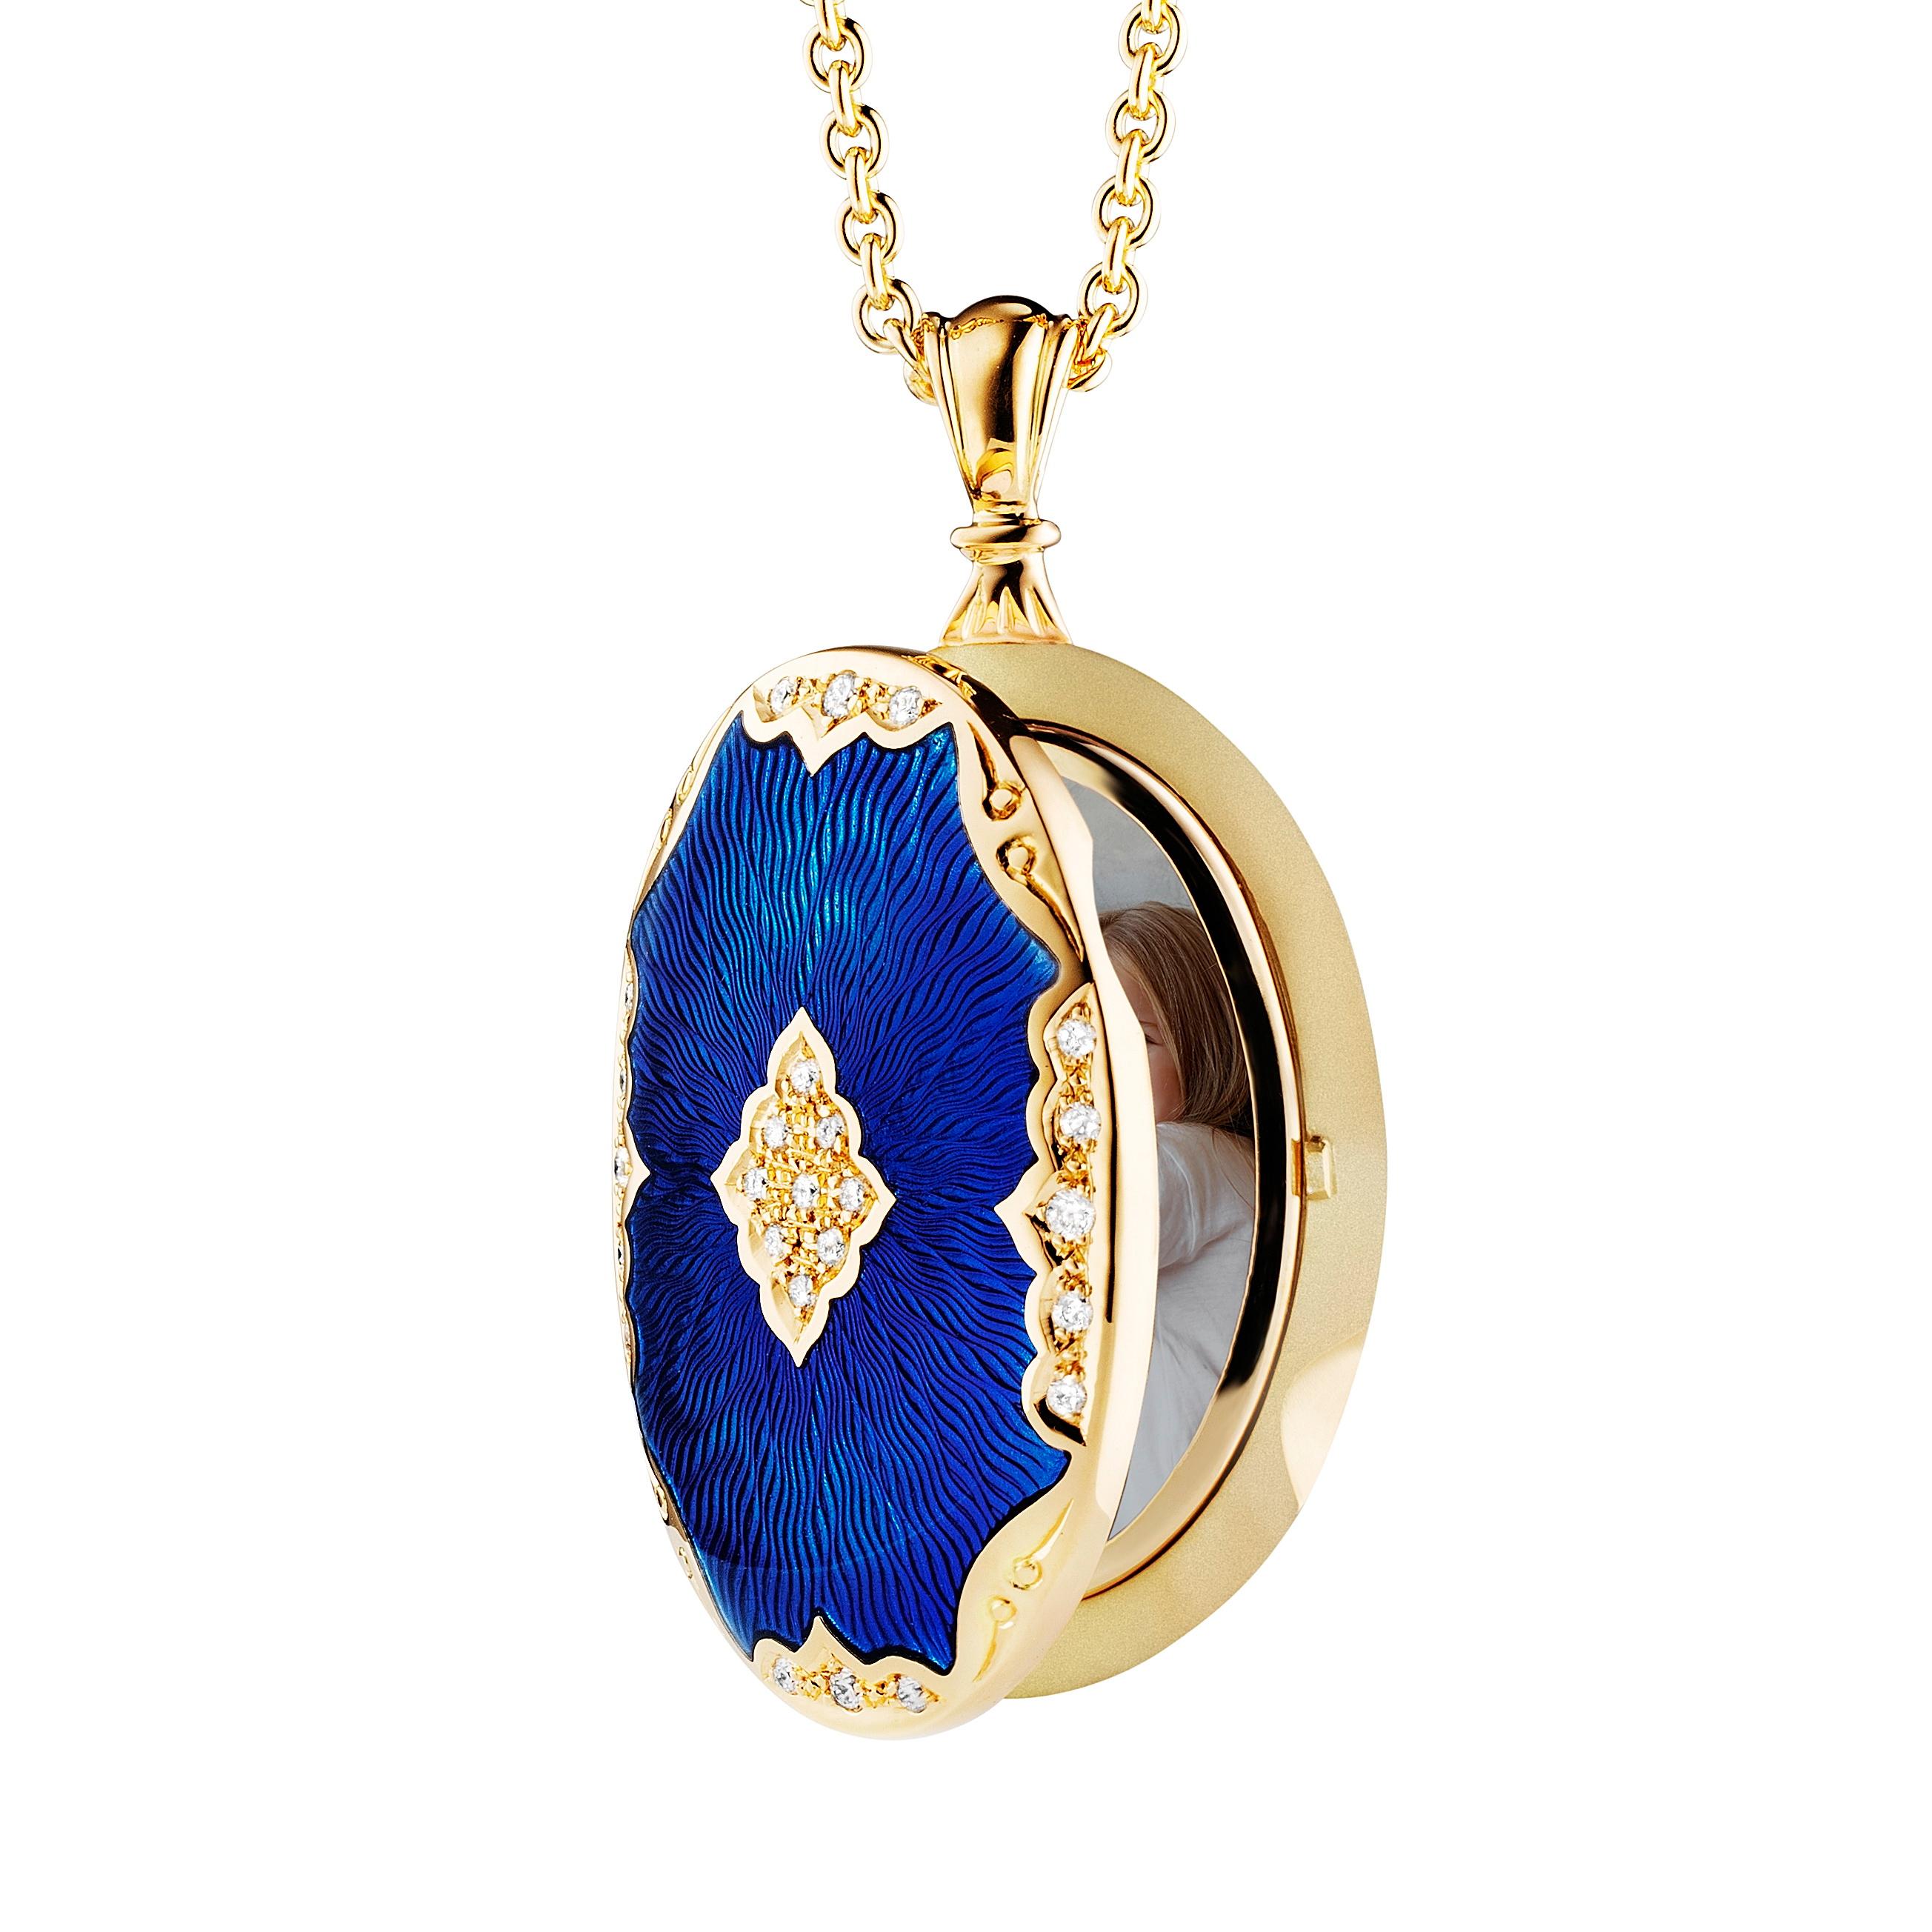 Victor Mayer oval locket pendant 18k yellow gold, electric blue vitreous enamel, 25 diamonds, total 0.19 ct, measurements app. 25.0 mm x 36.0 mm

About the creator Victor Mayer
Victor Mayer is internationally renowned for elegant timeless designs